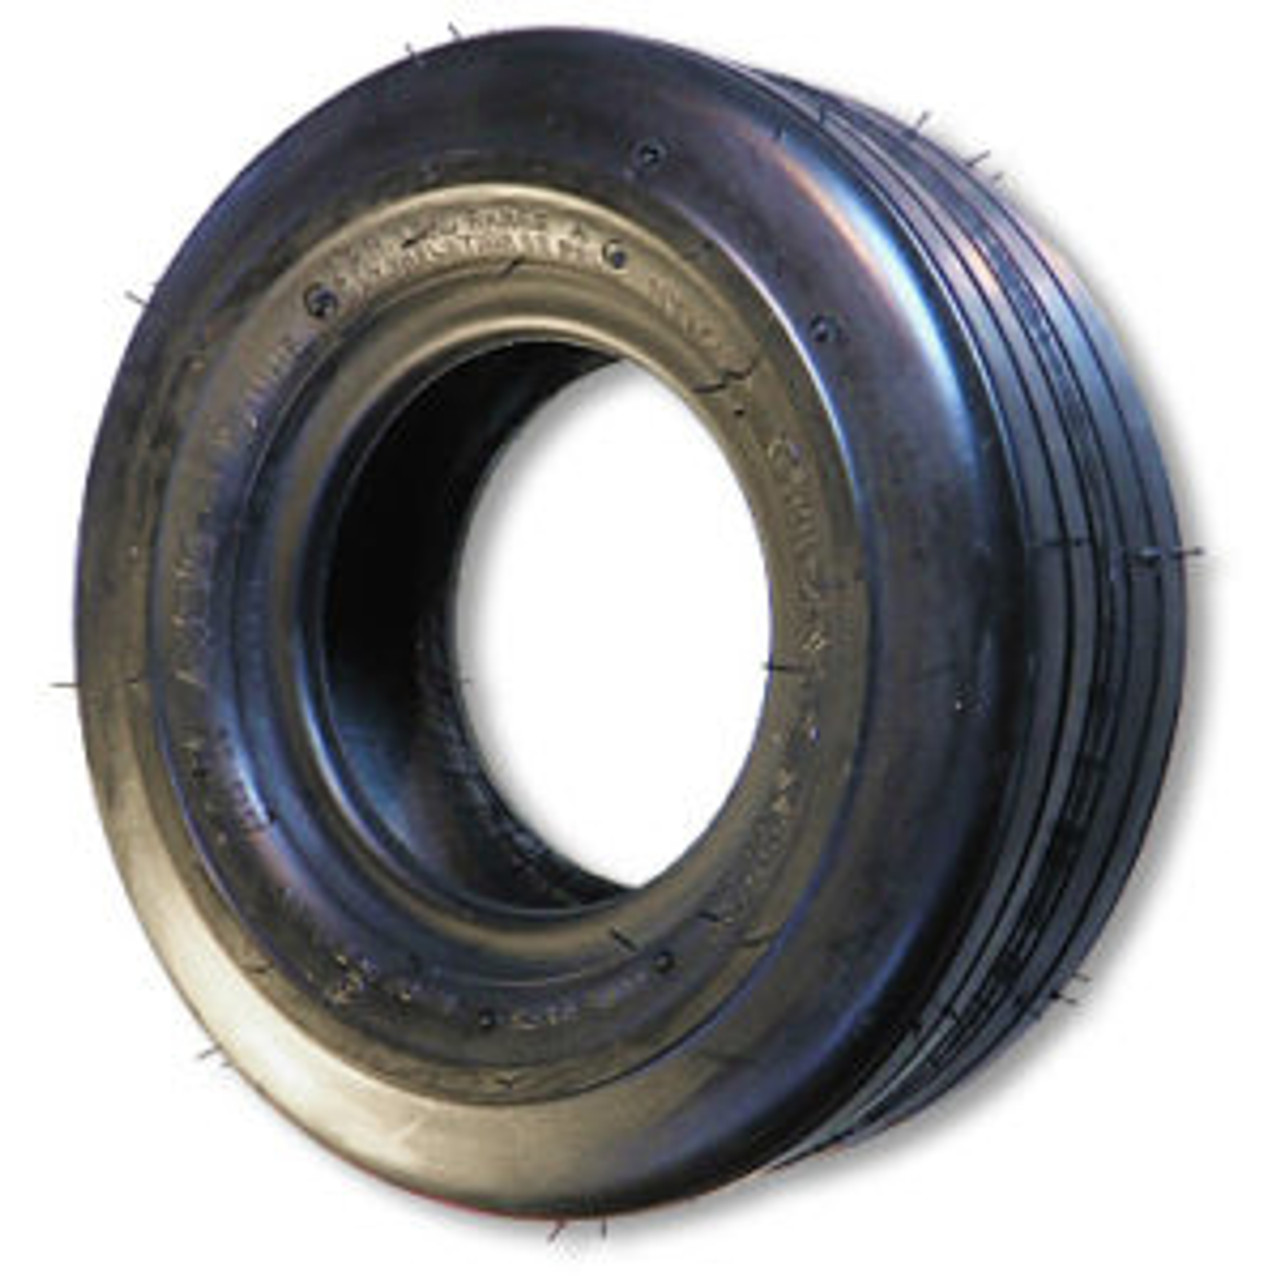 13-500 X 6 Ribbed Tire, 4 Ply, 4.8" Wide, 12.6" OD, Flat Profile